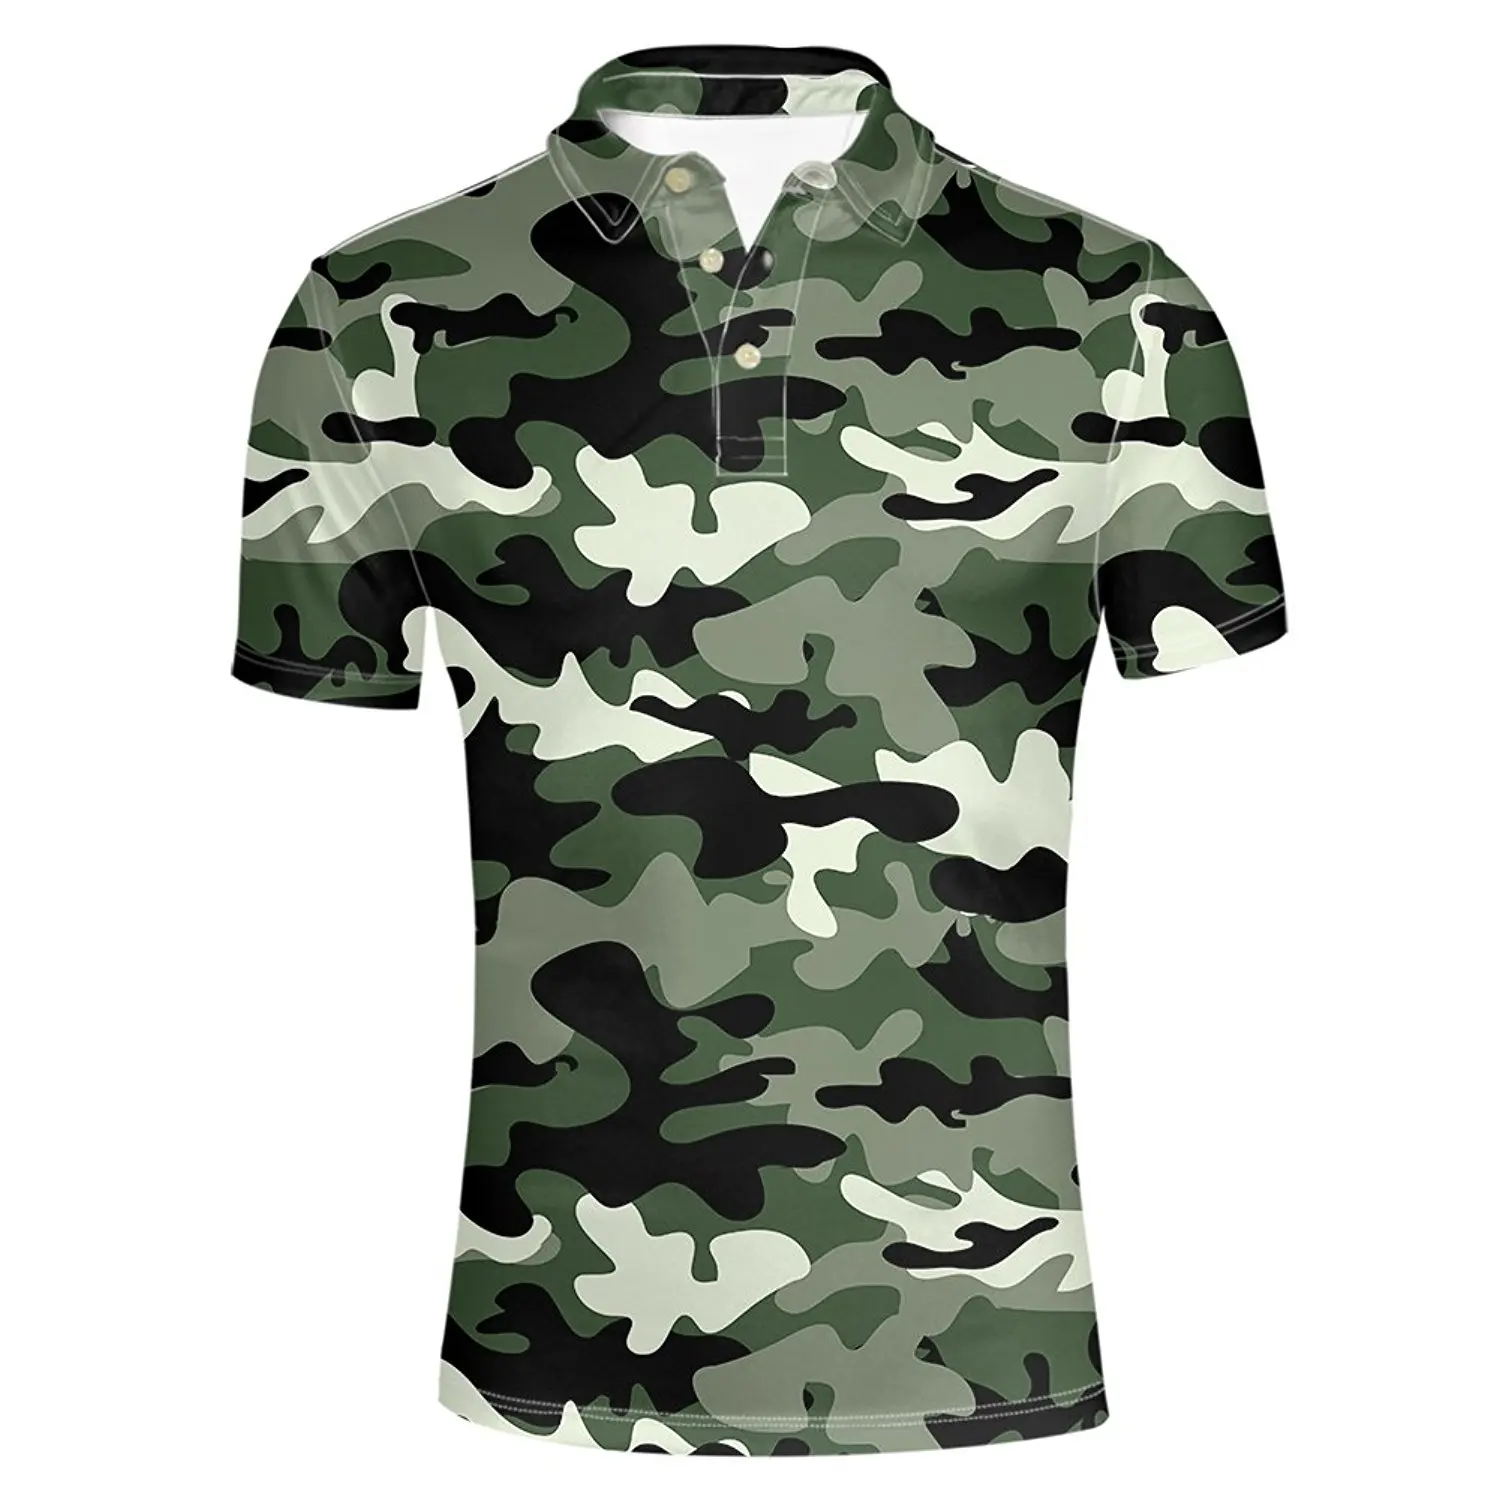 Cheap Camouflage Golf Shirts, find Camouflage Golf Shirts deals on line ...